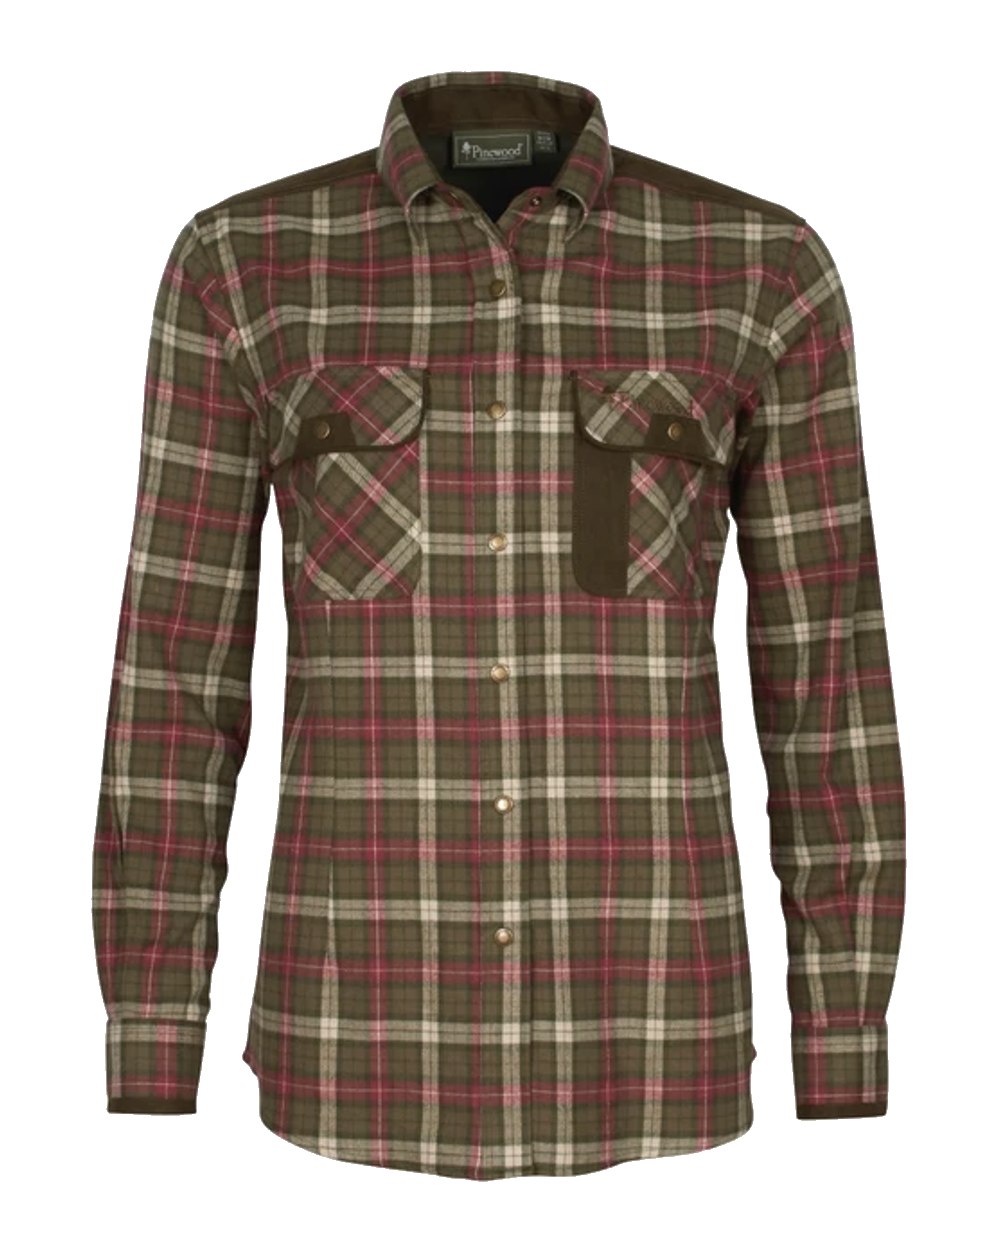 Pinewood Womens Prestwick Exclusive Shirt in Hunting Olive/Plum 